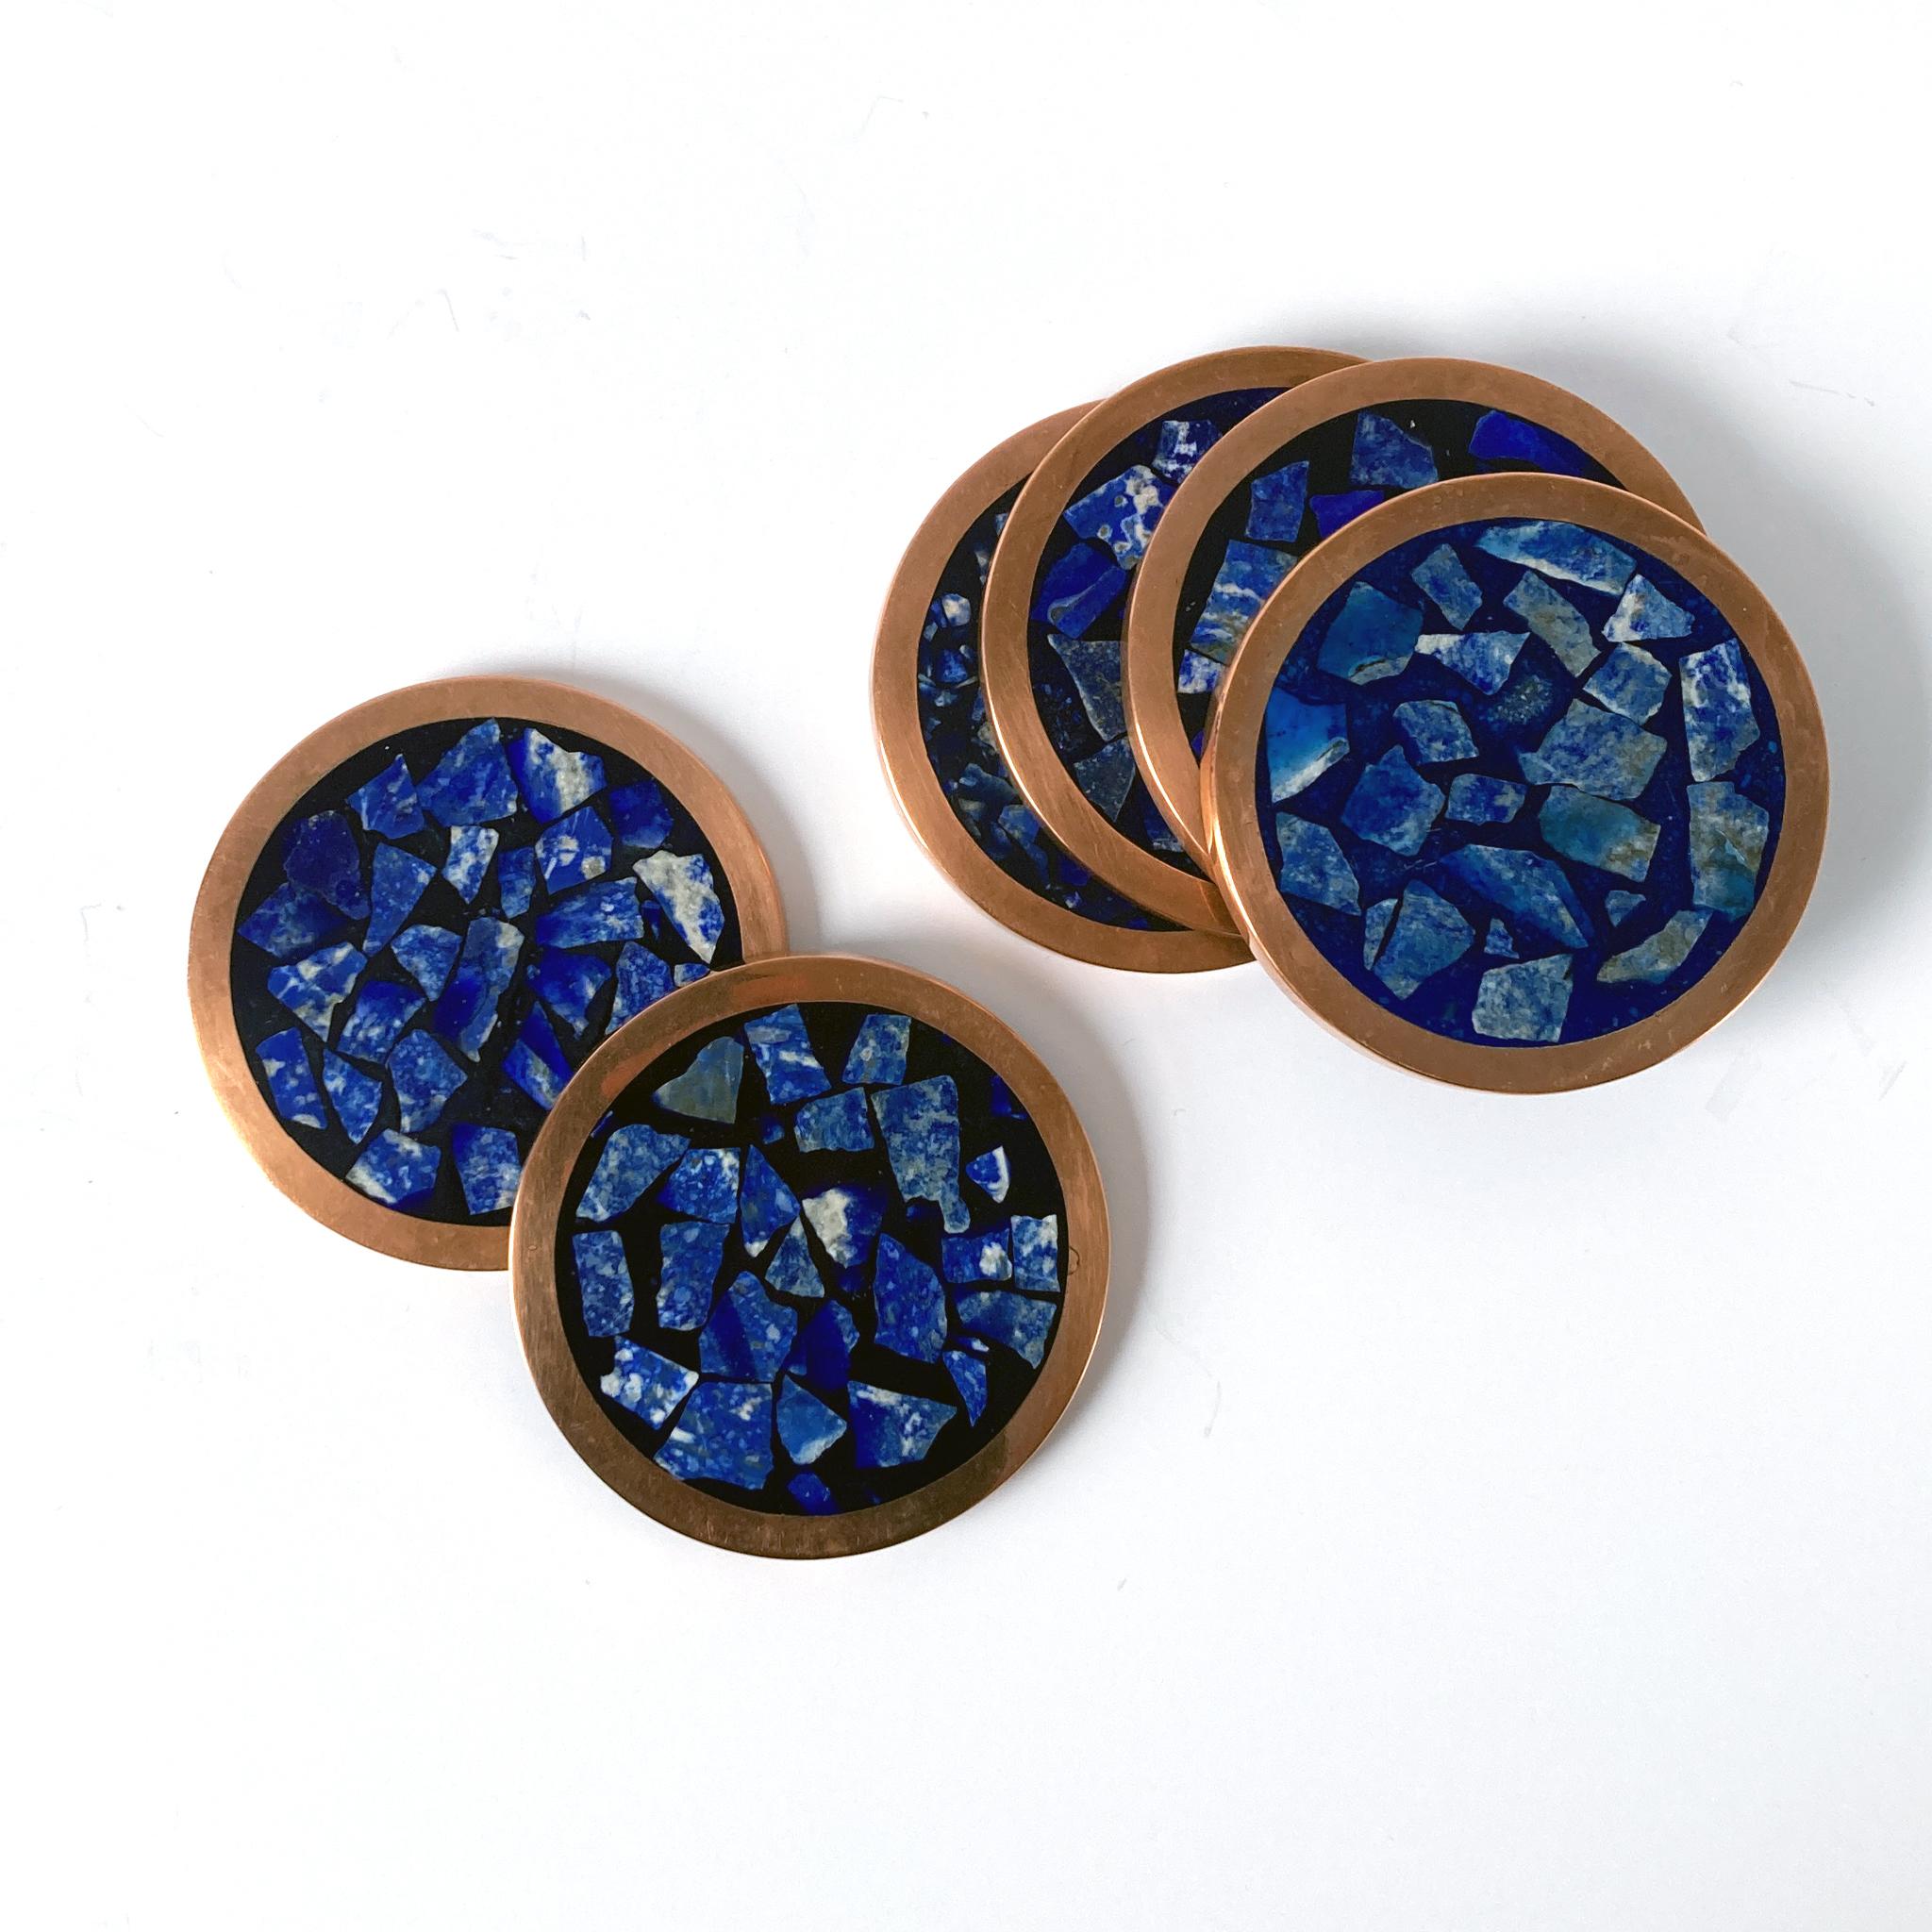 Stunning set of six lapis lazuli coasters, rimmed in copper. The pattern of the mosaic contrasts beautifully with the copper; the lapis is luminous in shades blue with some flecks of tan and ecru. These coasters would look wonderful as part of a bar